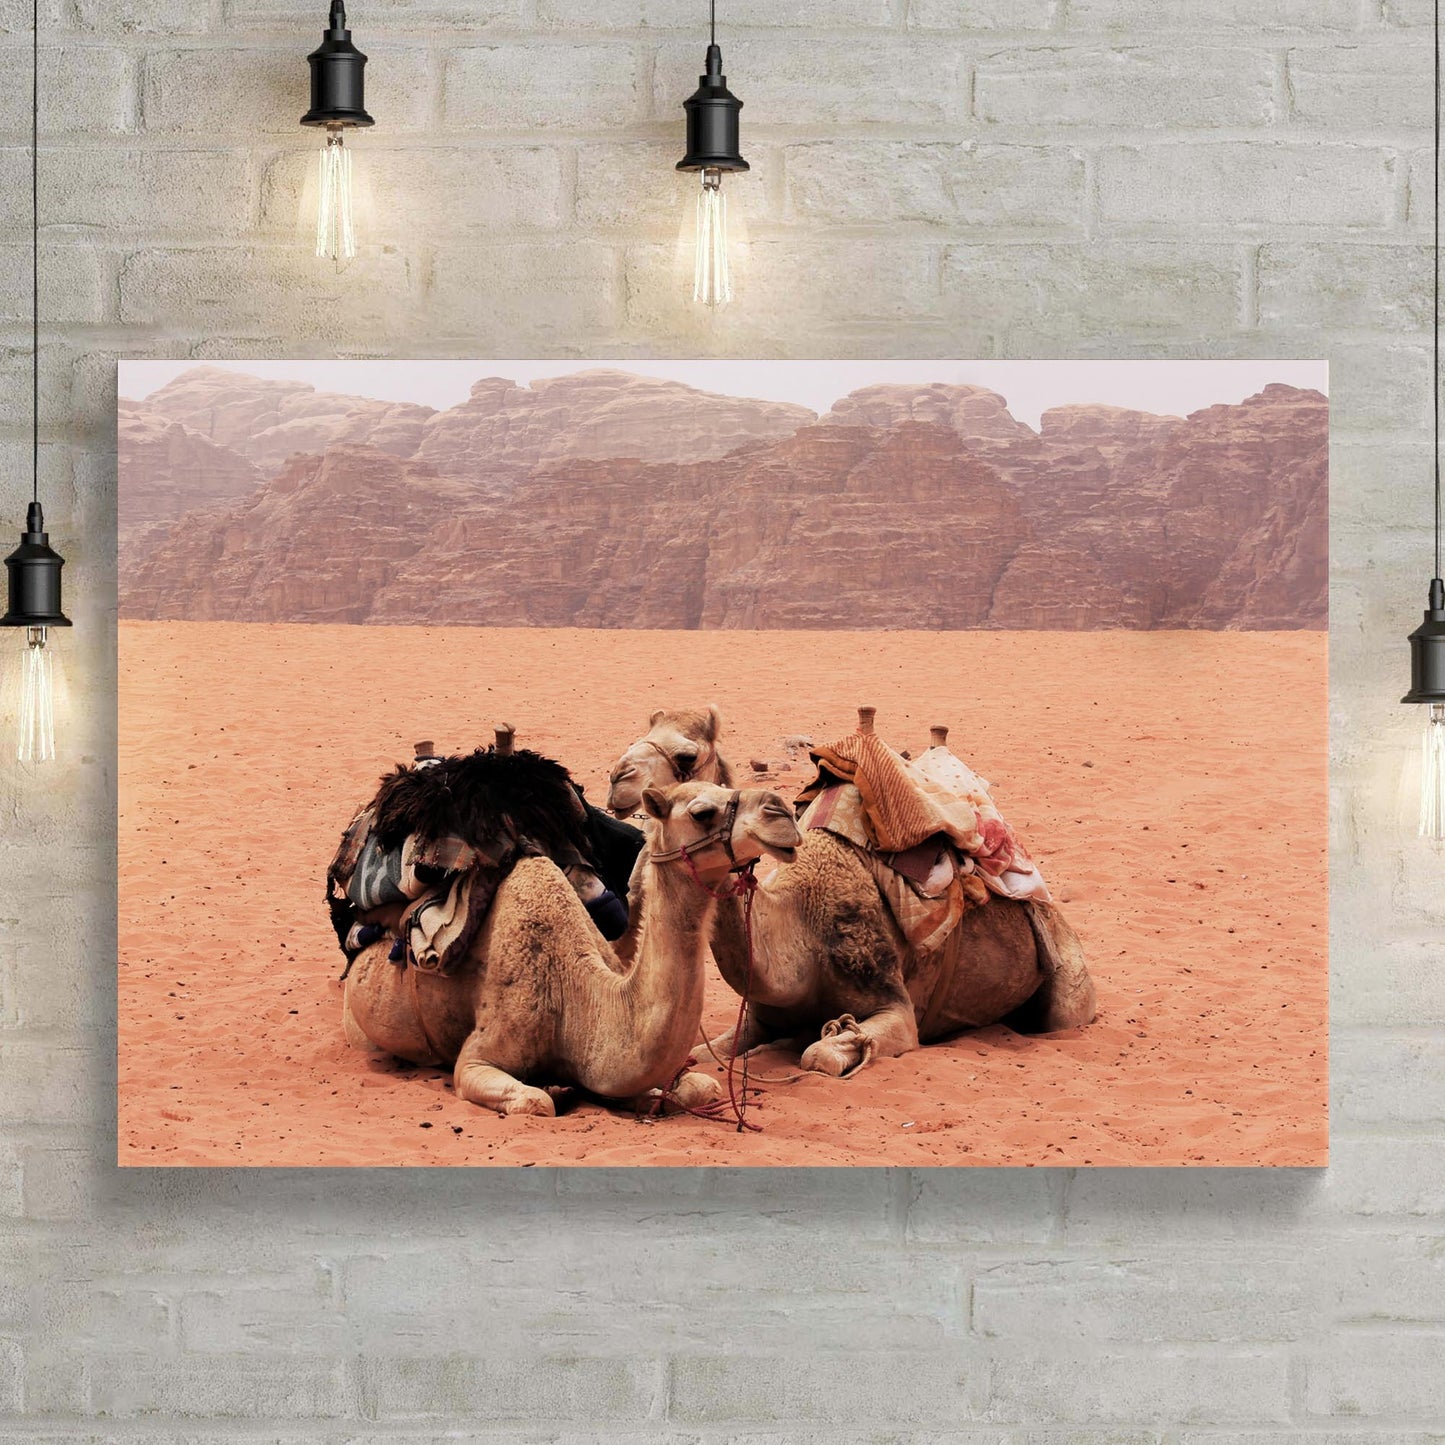 Camels In Wadi Rum Desert Canvas Wall Art - Image by Tailored Canvases